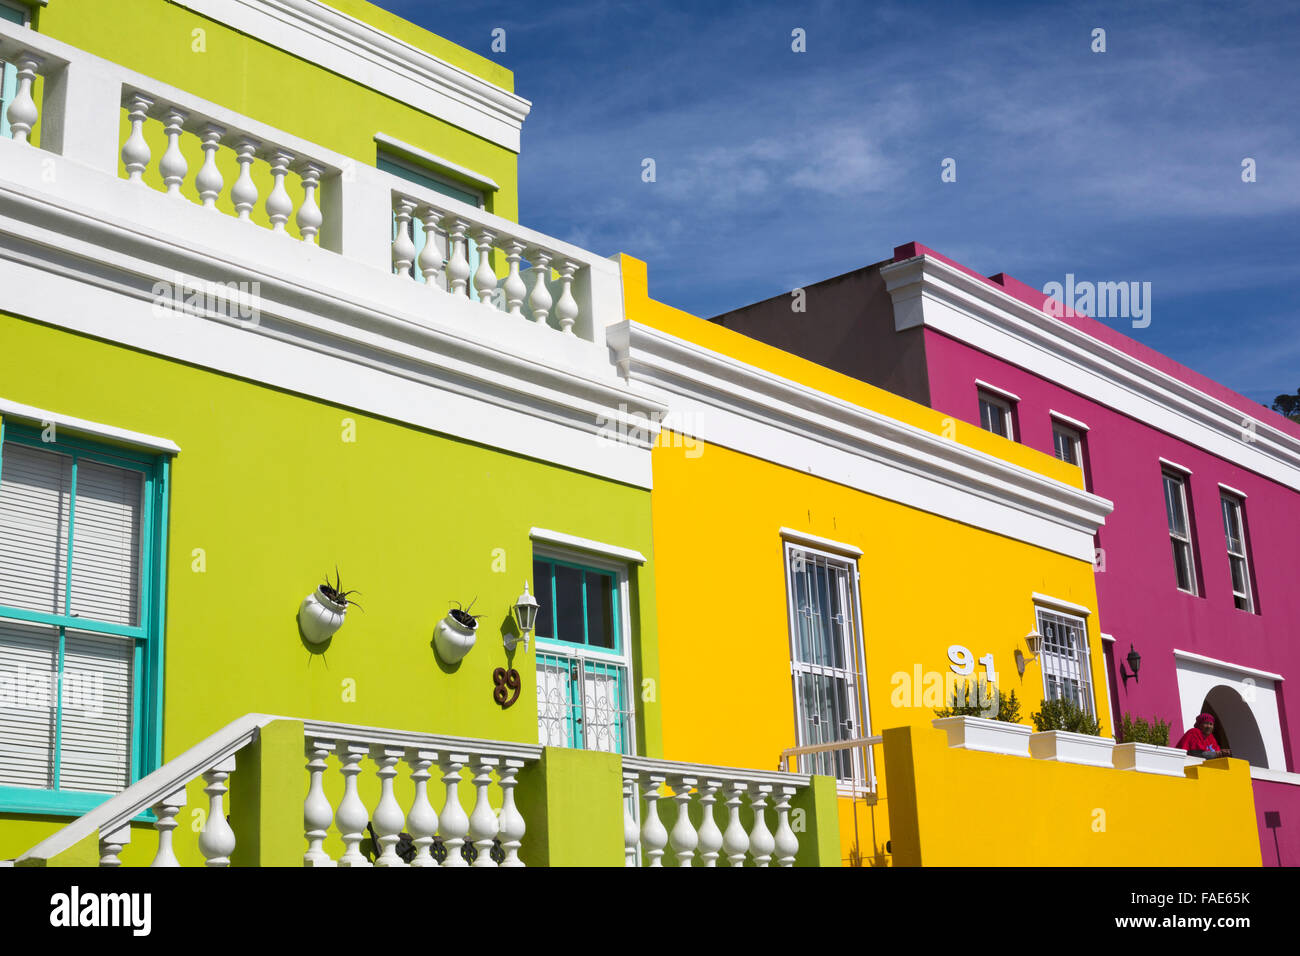 Colourful cottages, Bo Kaap Cape Malay district, Cape Town, South Africa, Stock Photo